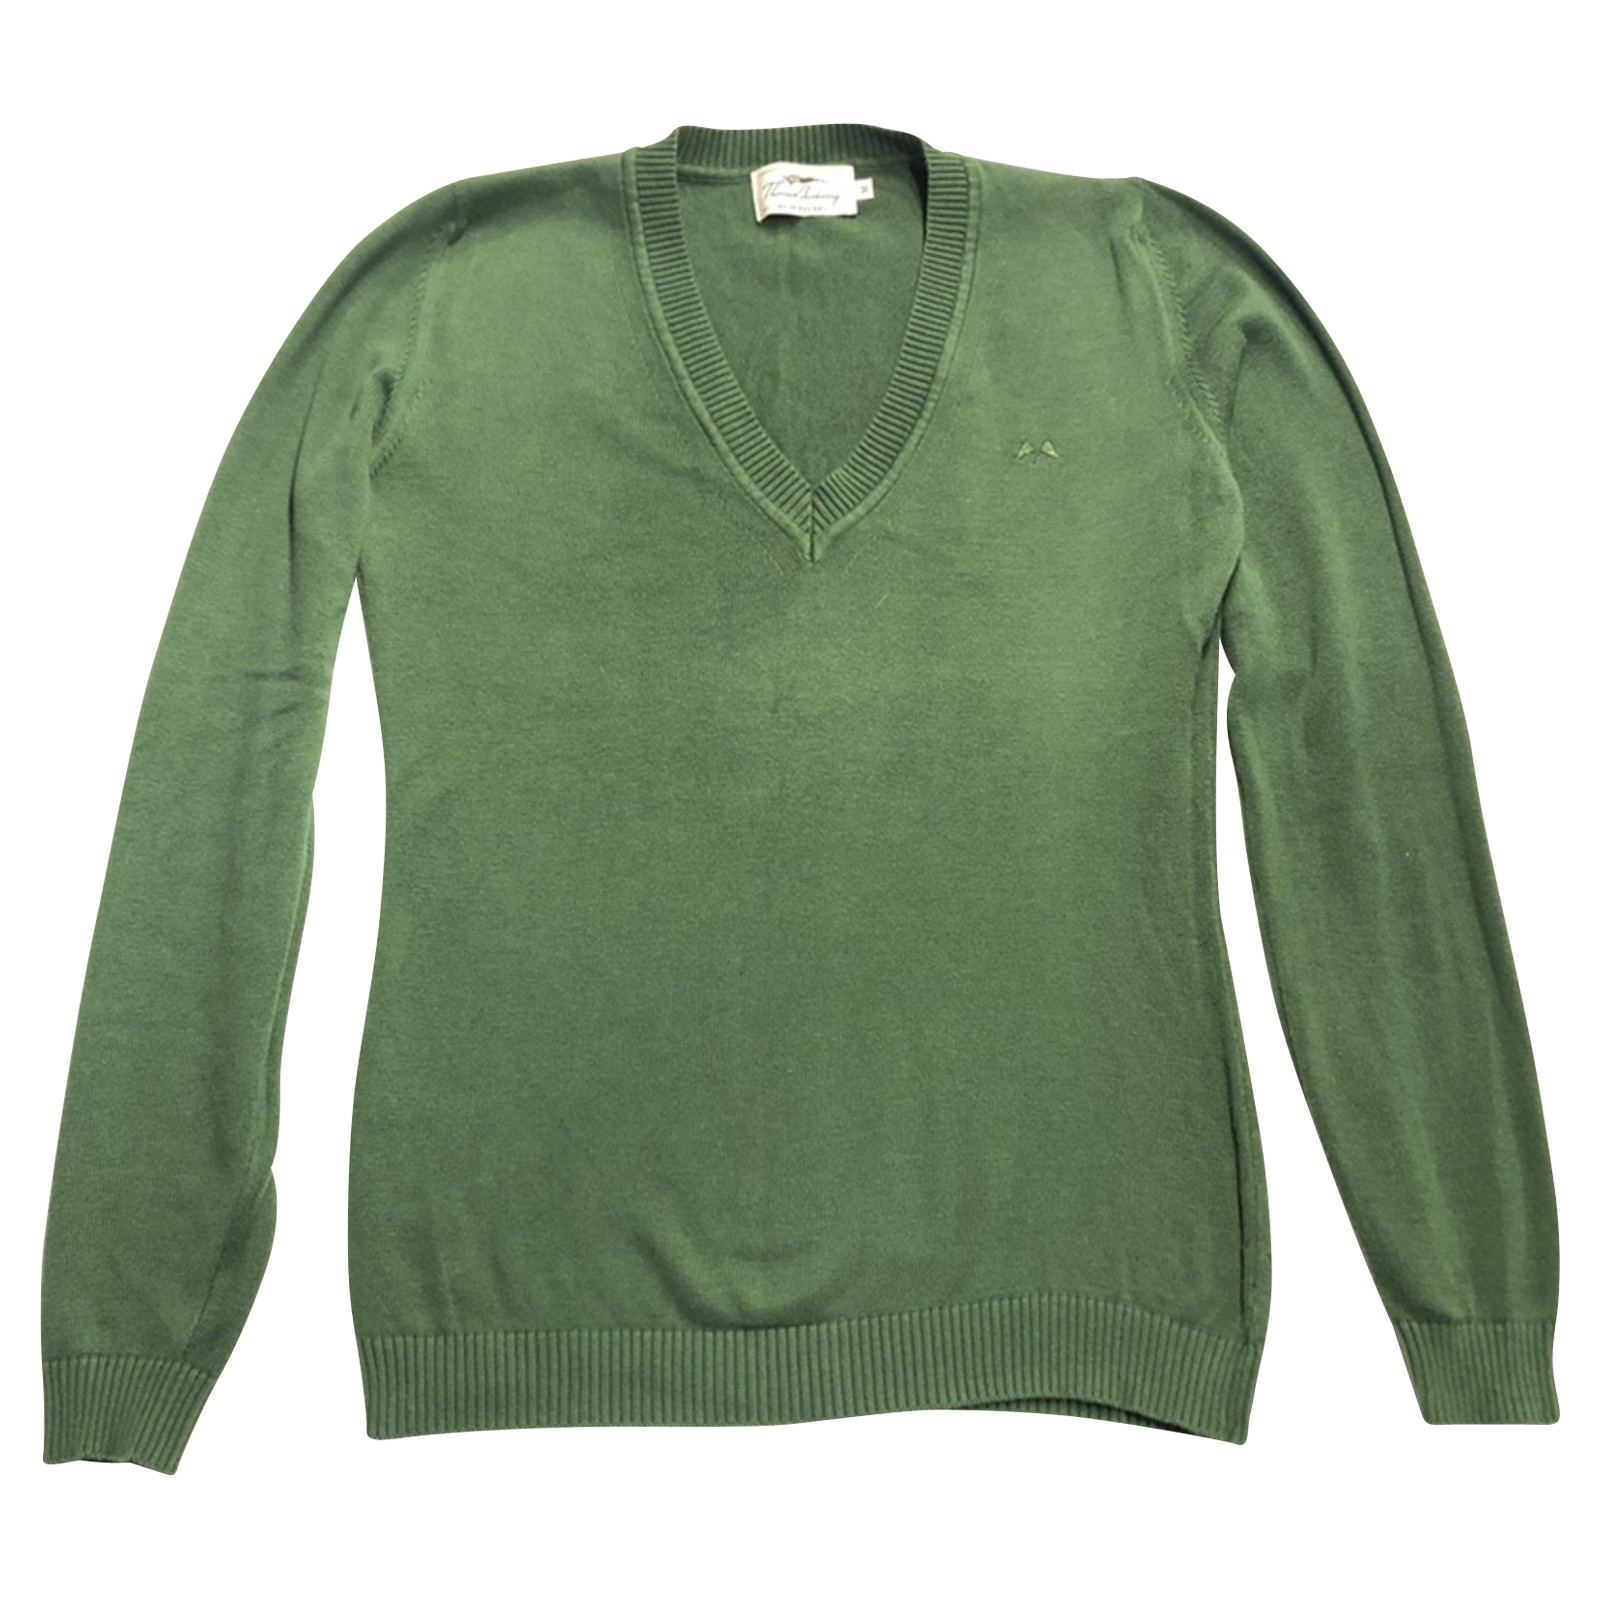 Thomas Burberry Knitwear Cotton in Green - Second Hand Thomas Burberry  Knitwear Cotton in Green buy used for 46€ (3346608)